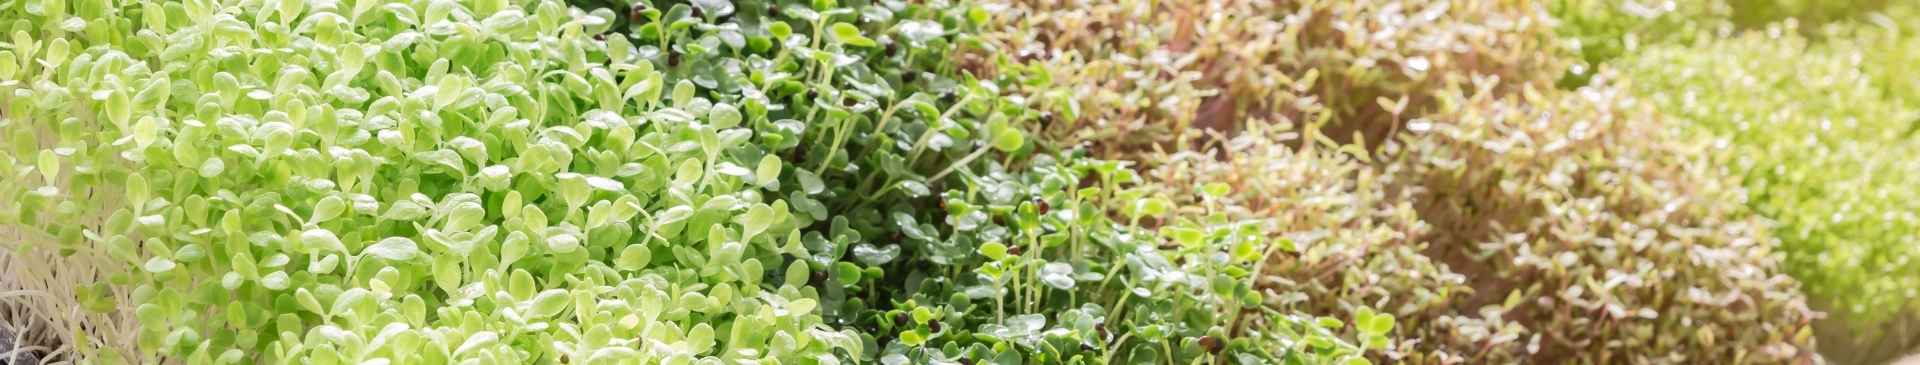 How to Grow Microgreens - Its Simple and Quick but Intensely Rewarding